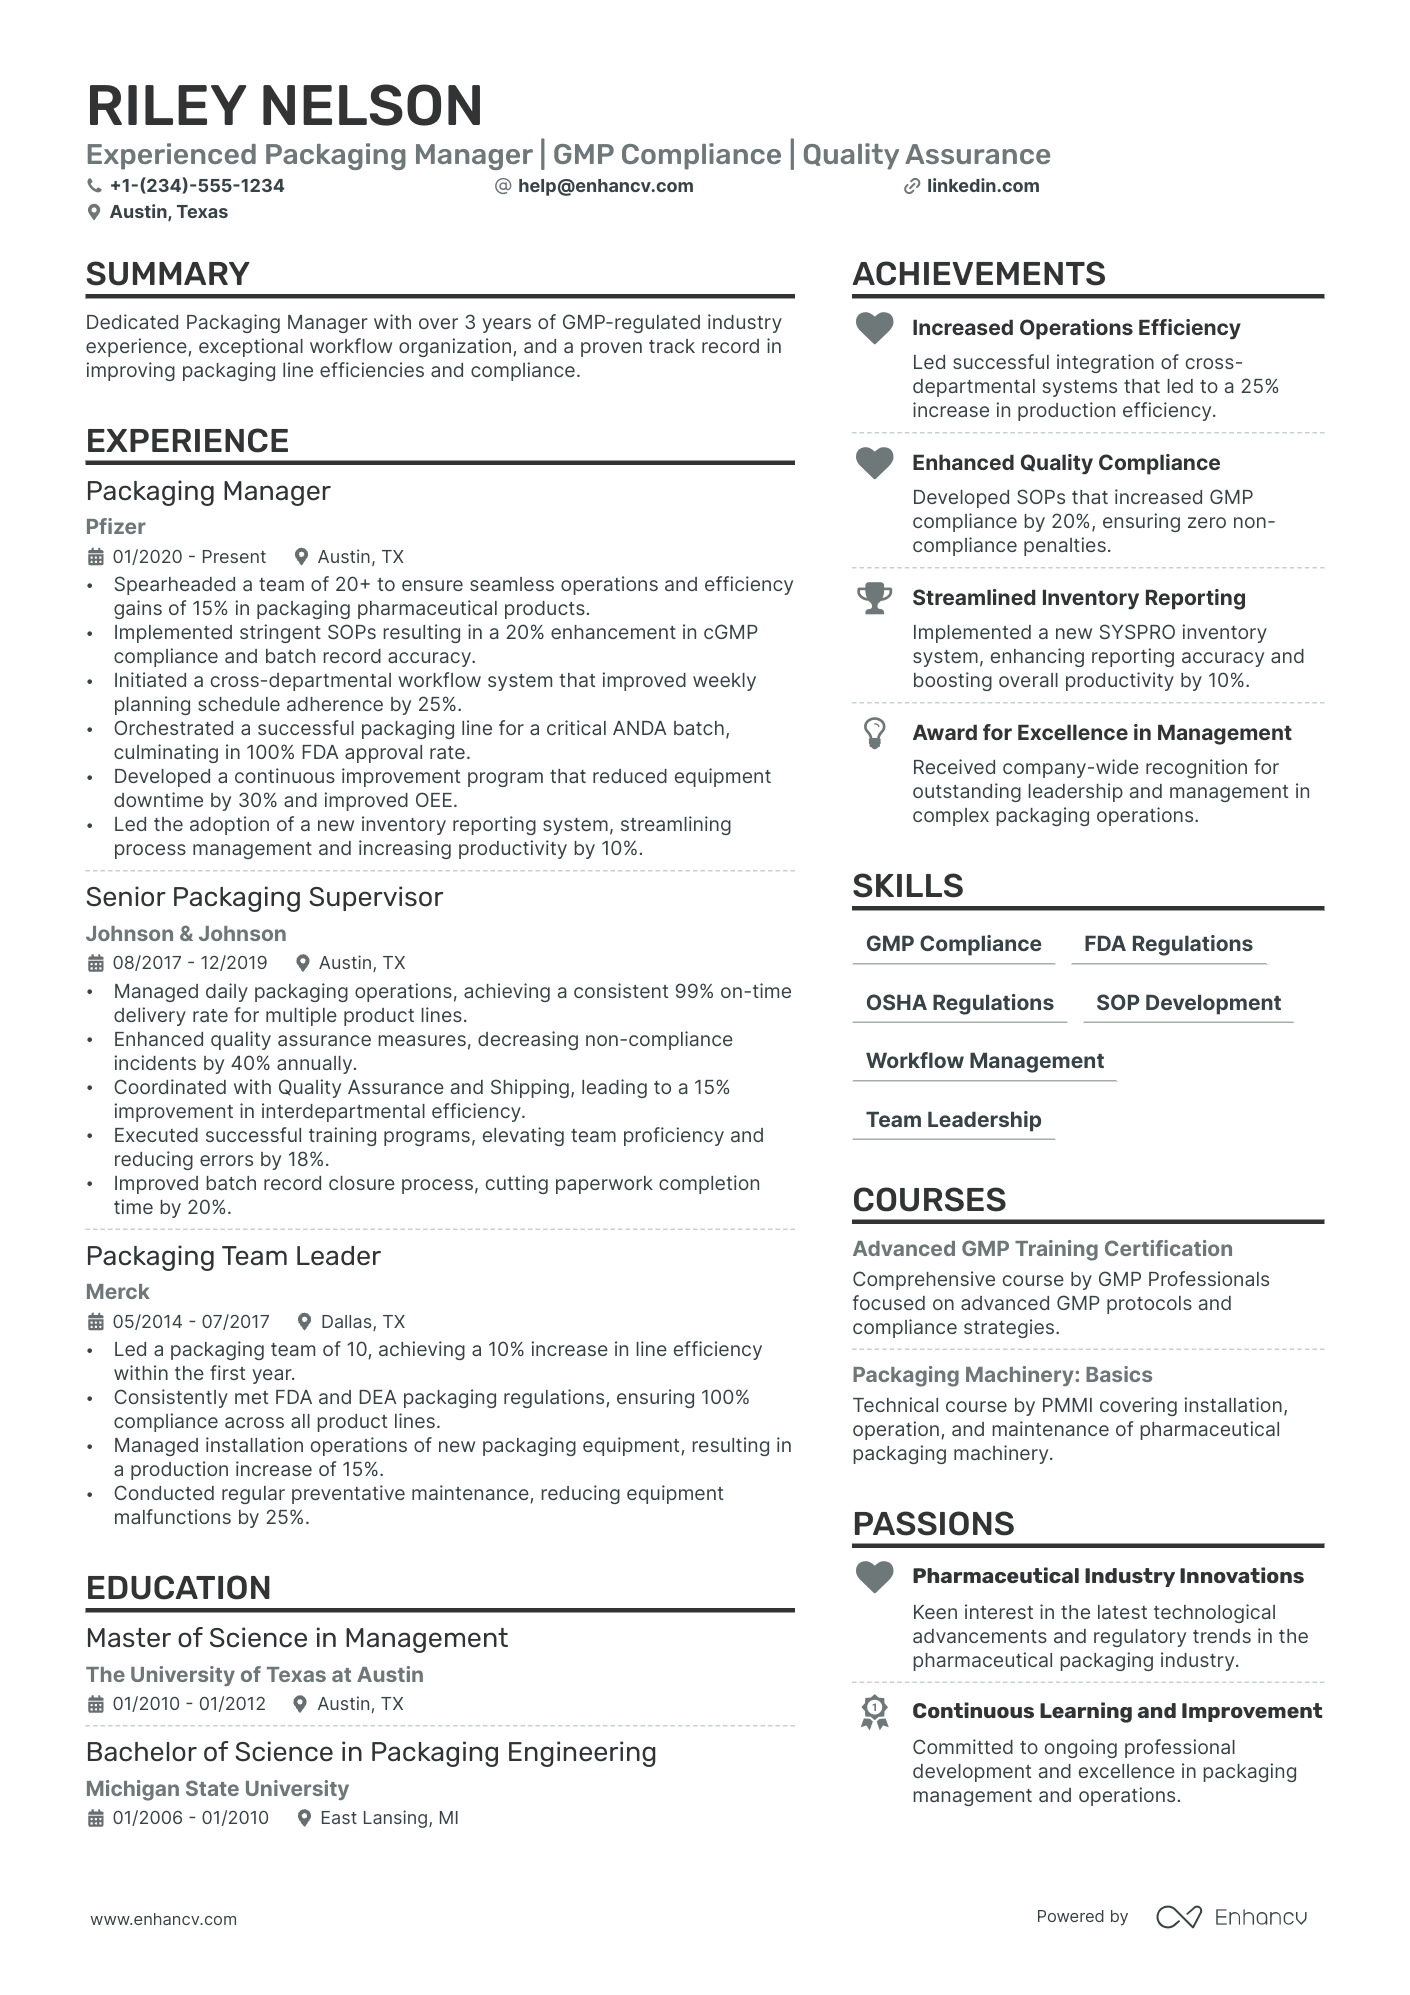 Packaging Manager resume example